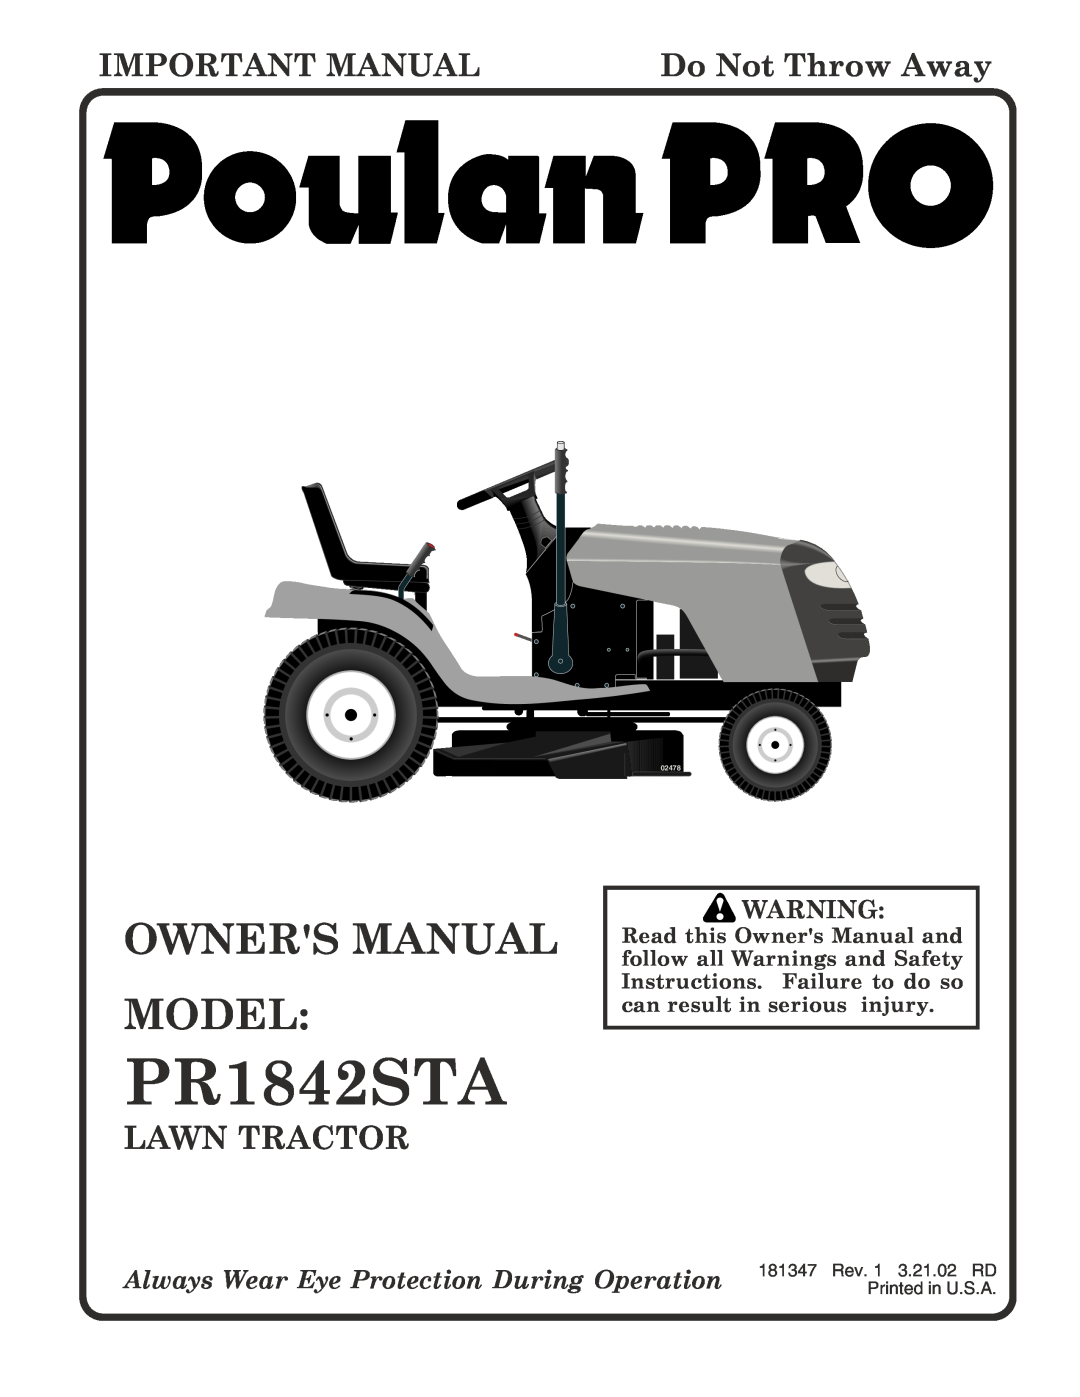 Poulan PR1842STA owner manual Important Manual, Do Not Throw Away, Lawn Tractor, 02478 